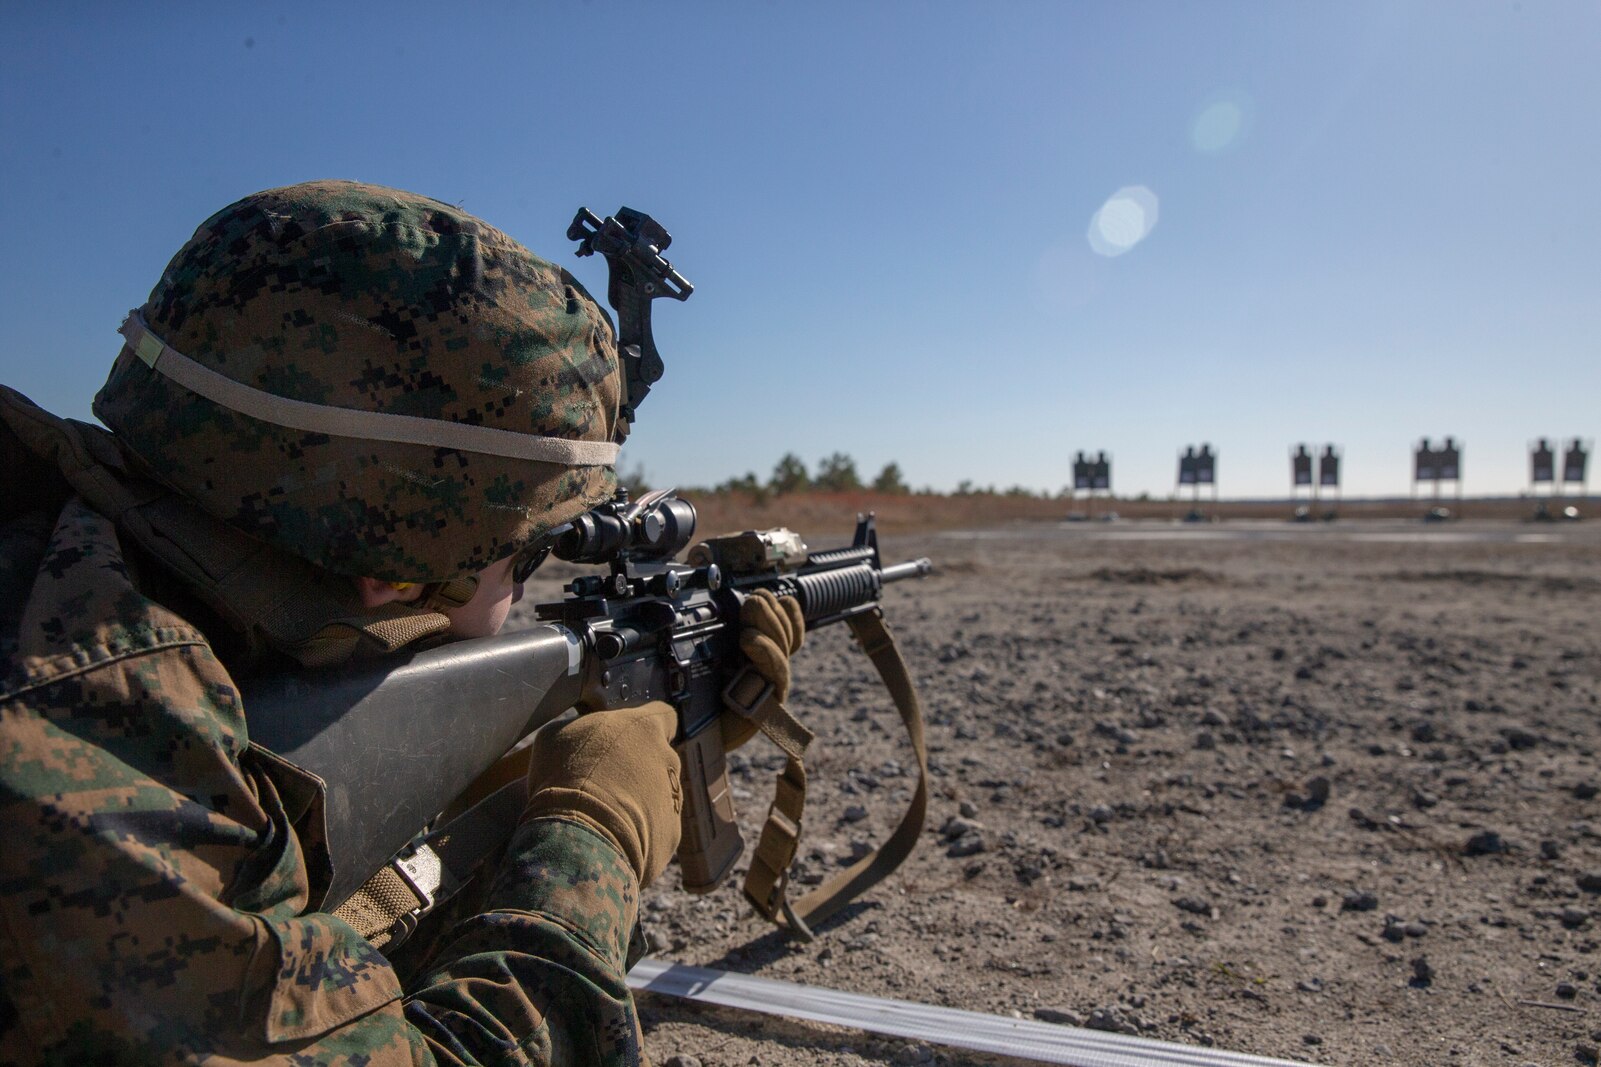 The purpose of this training is to meet the new annual rifle qualification requirements established by Headquarters Marine Corps. In addition to Tables One and Two, all units must now complete Tables Three through Six. (U.S. Marine Corps Photo by Cpl. Caleb T. Maher)